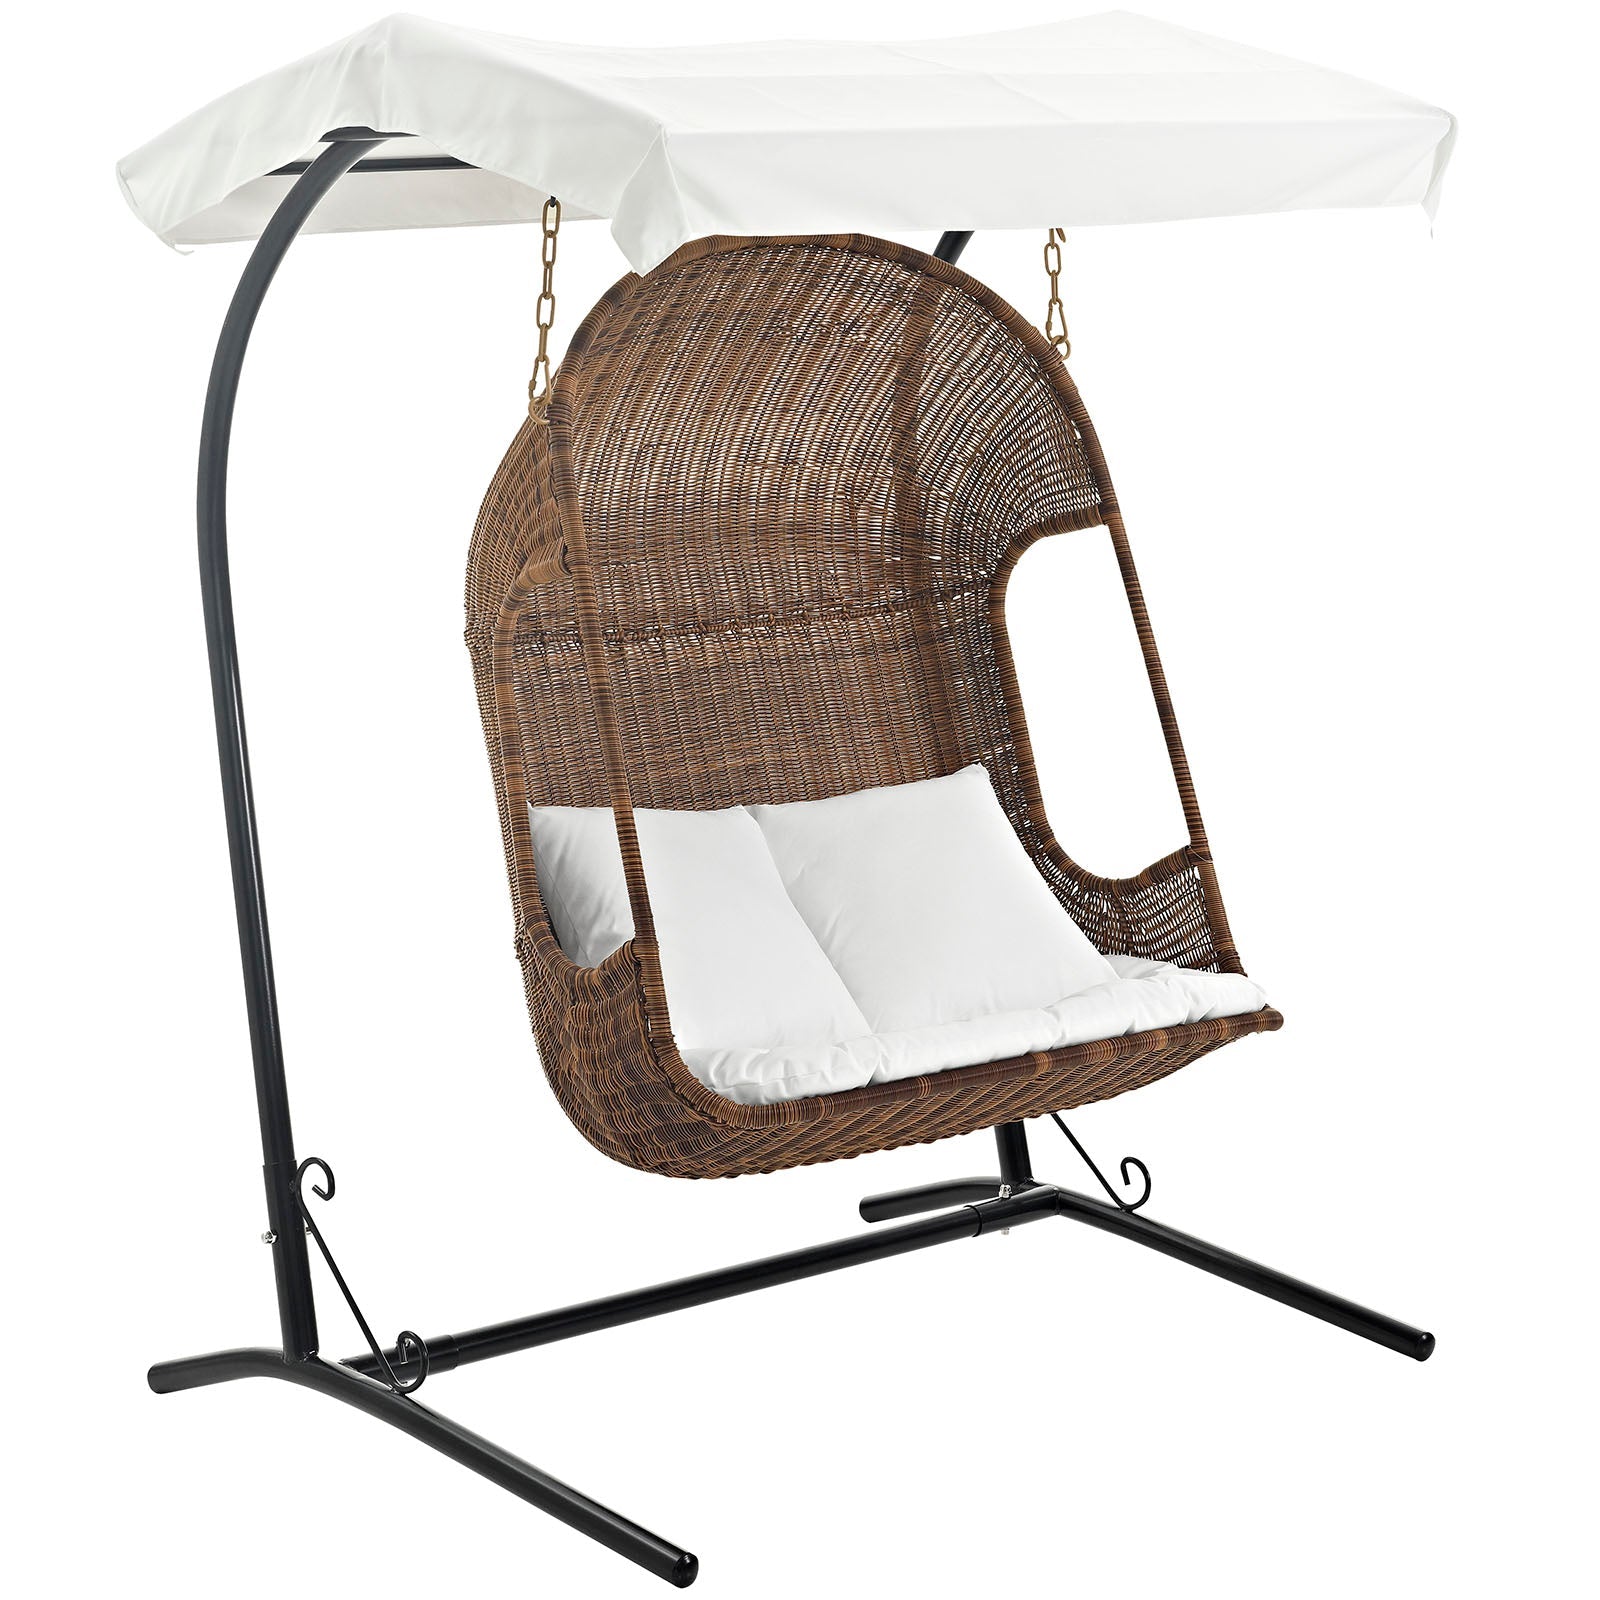 Vantage Patio Swing Chair With Stand